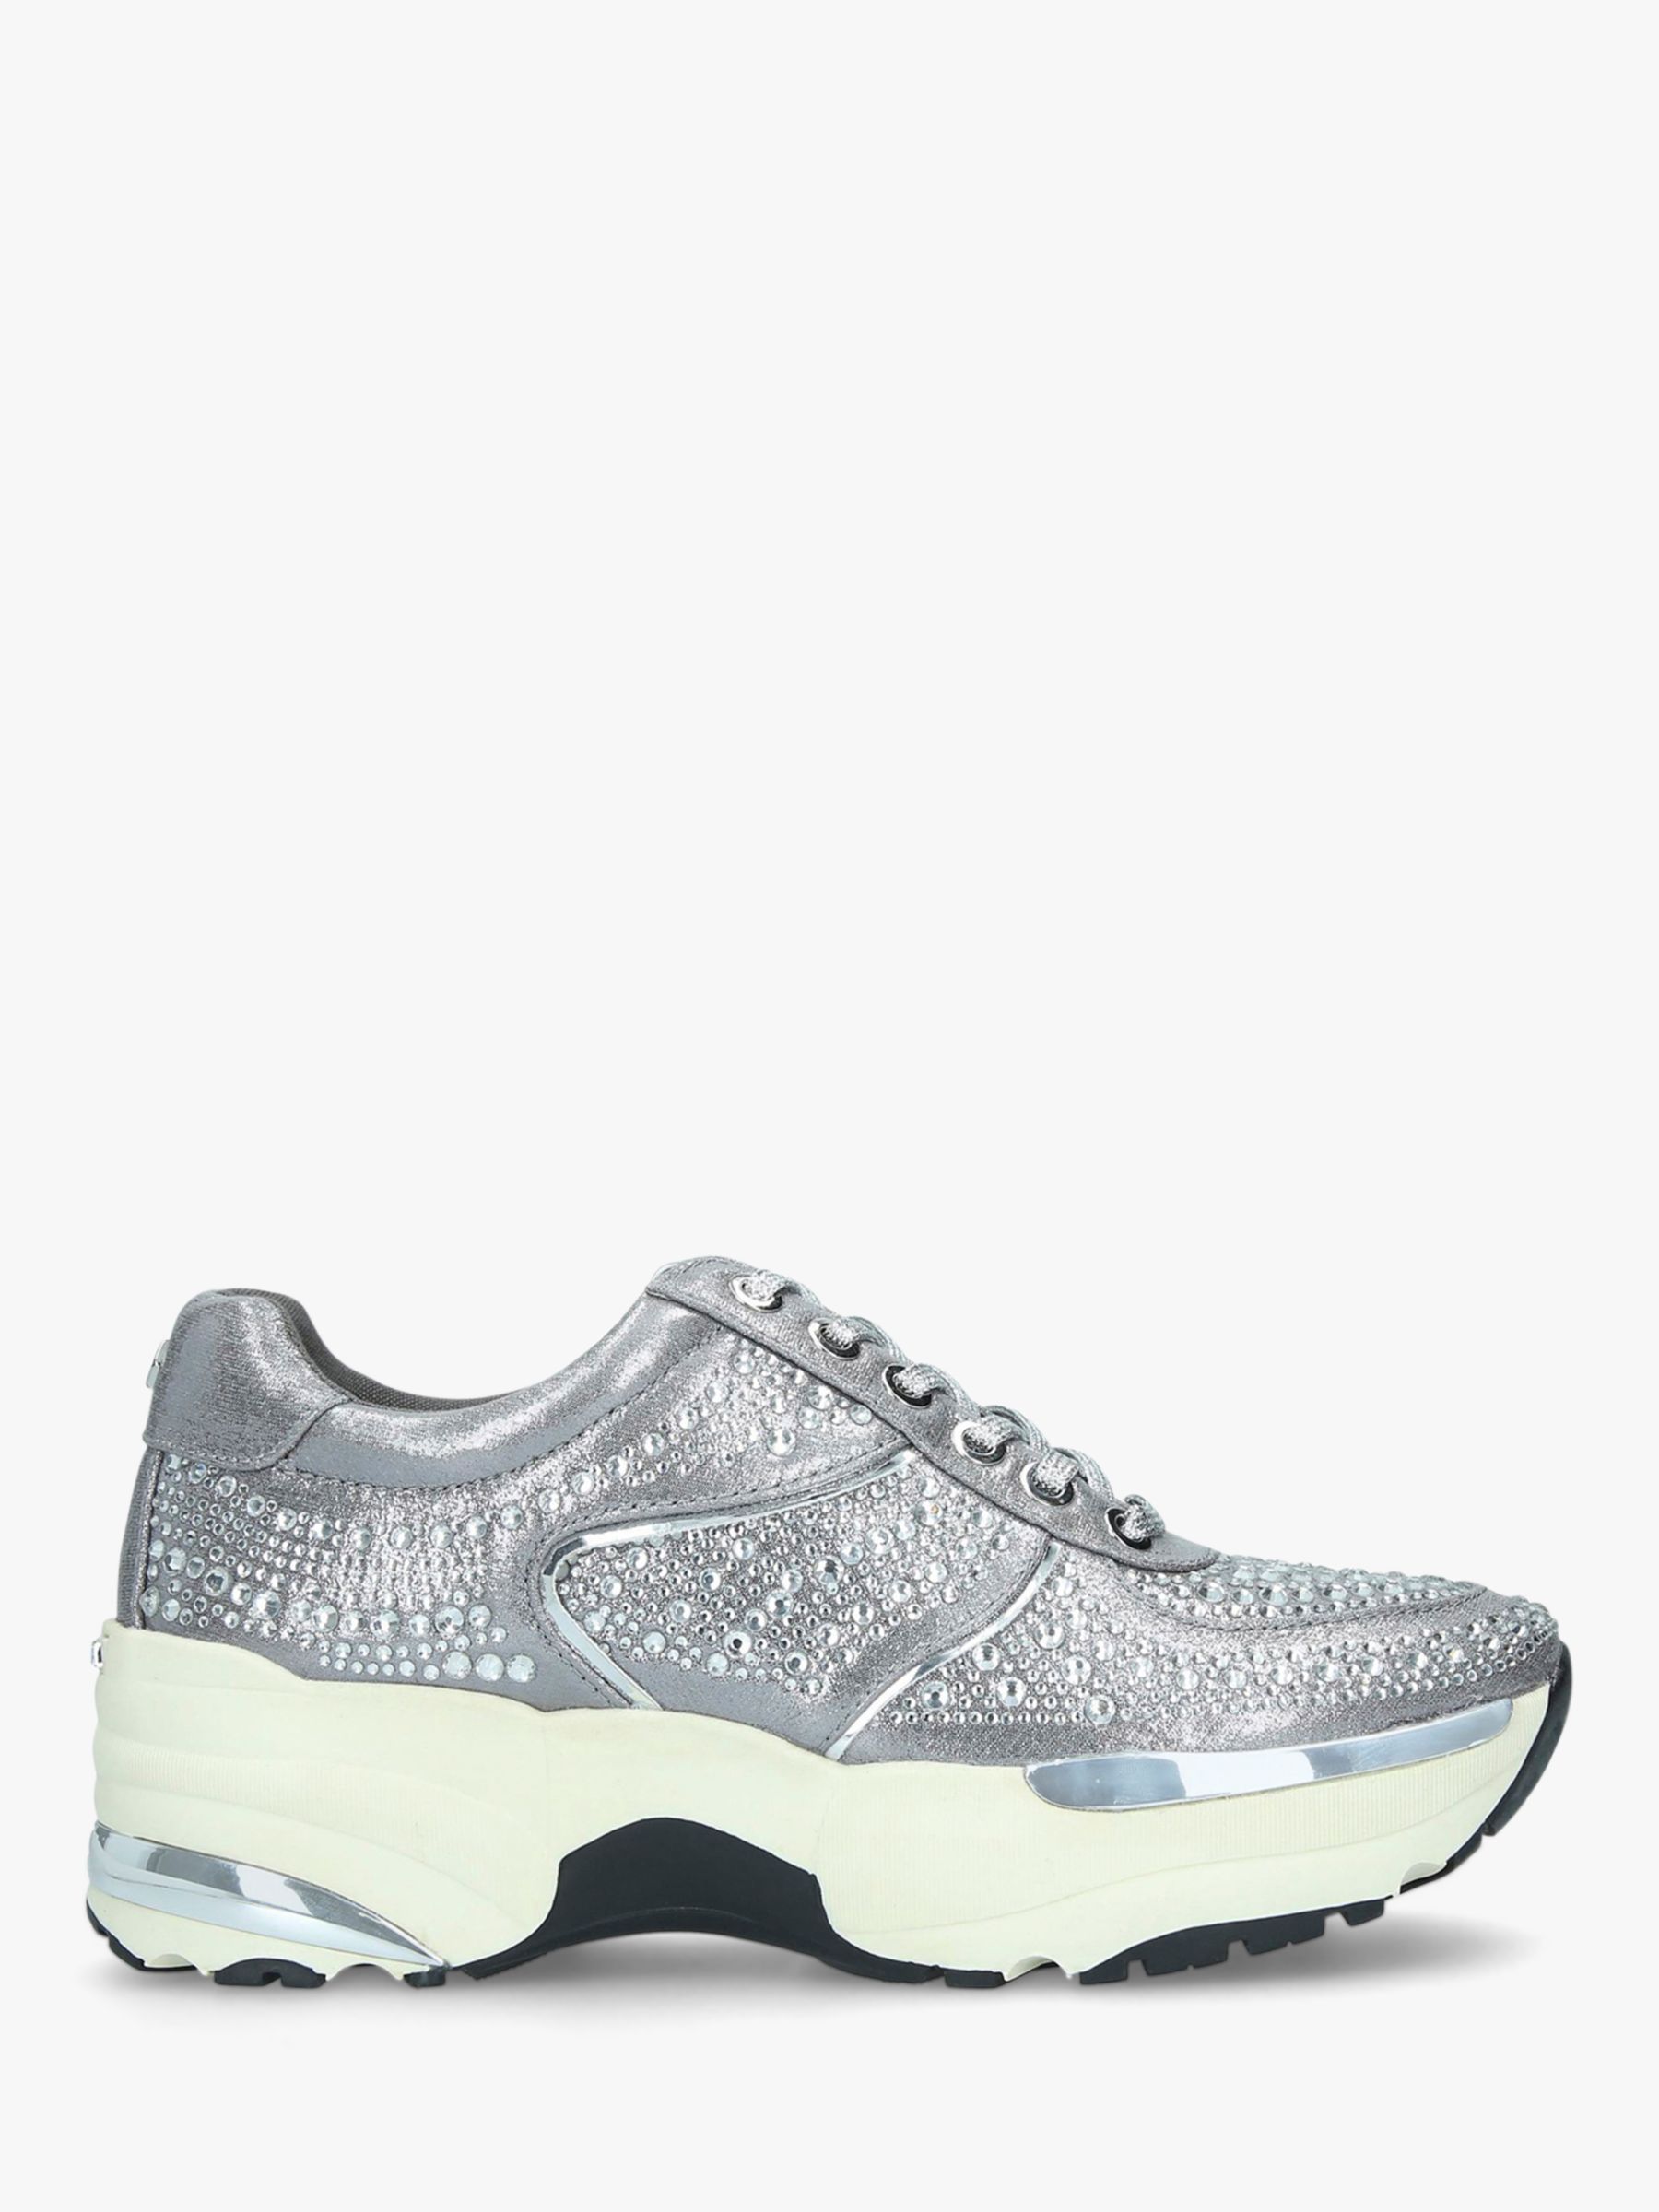 Carvela Lips Embellished Chunky Trainers, Silver at John Lewis & Partners